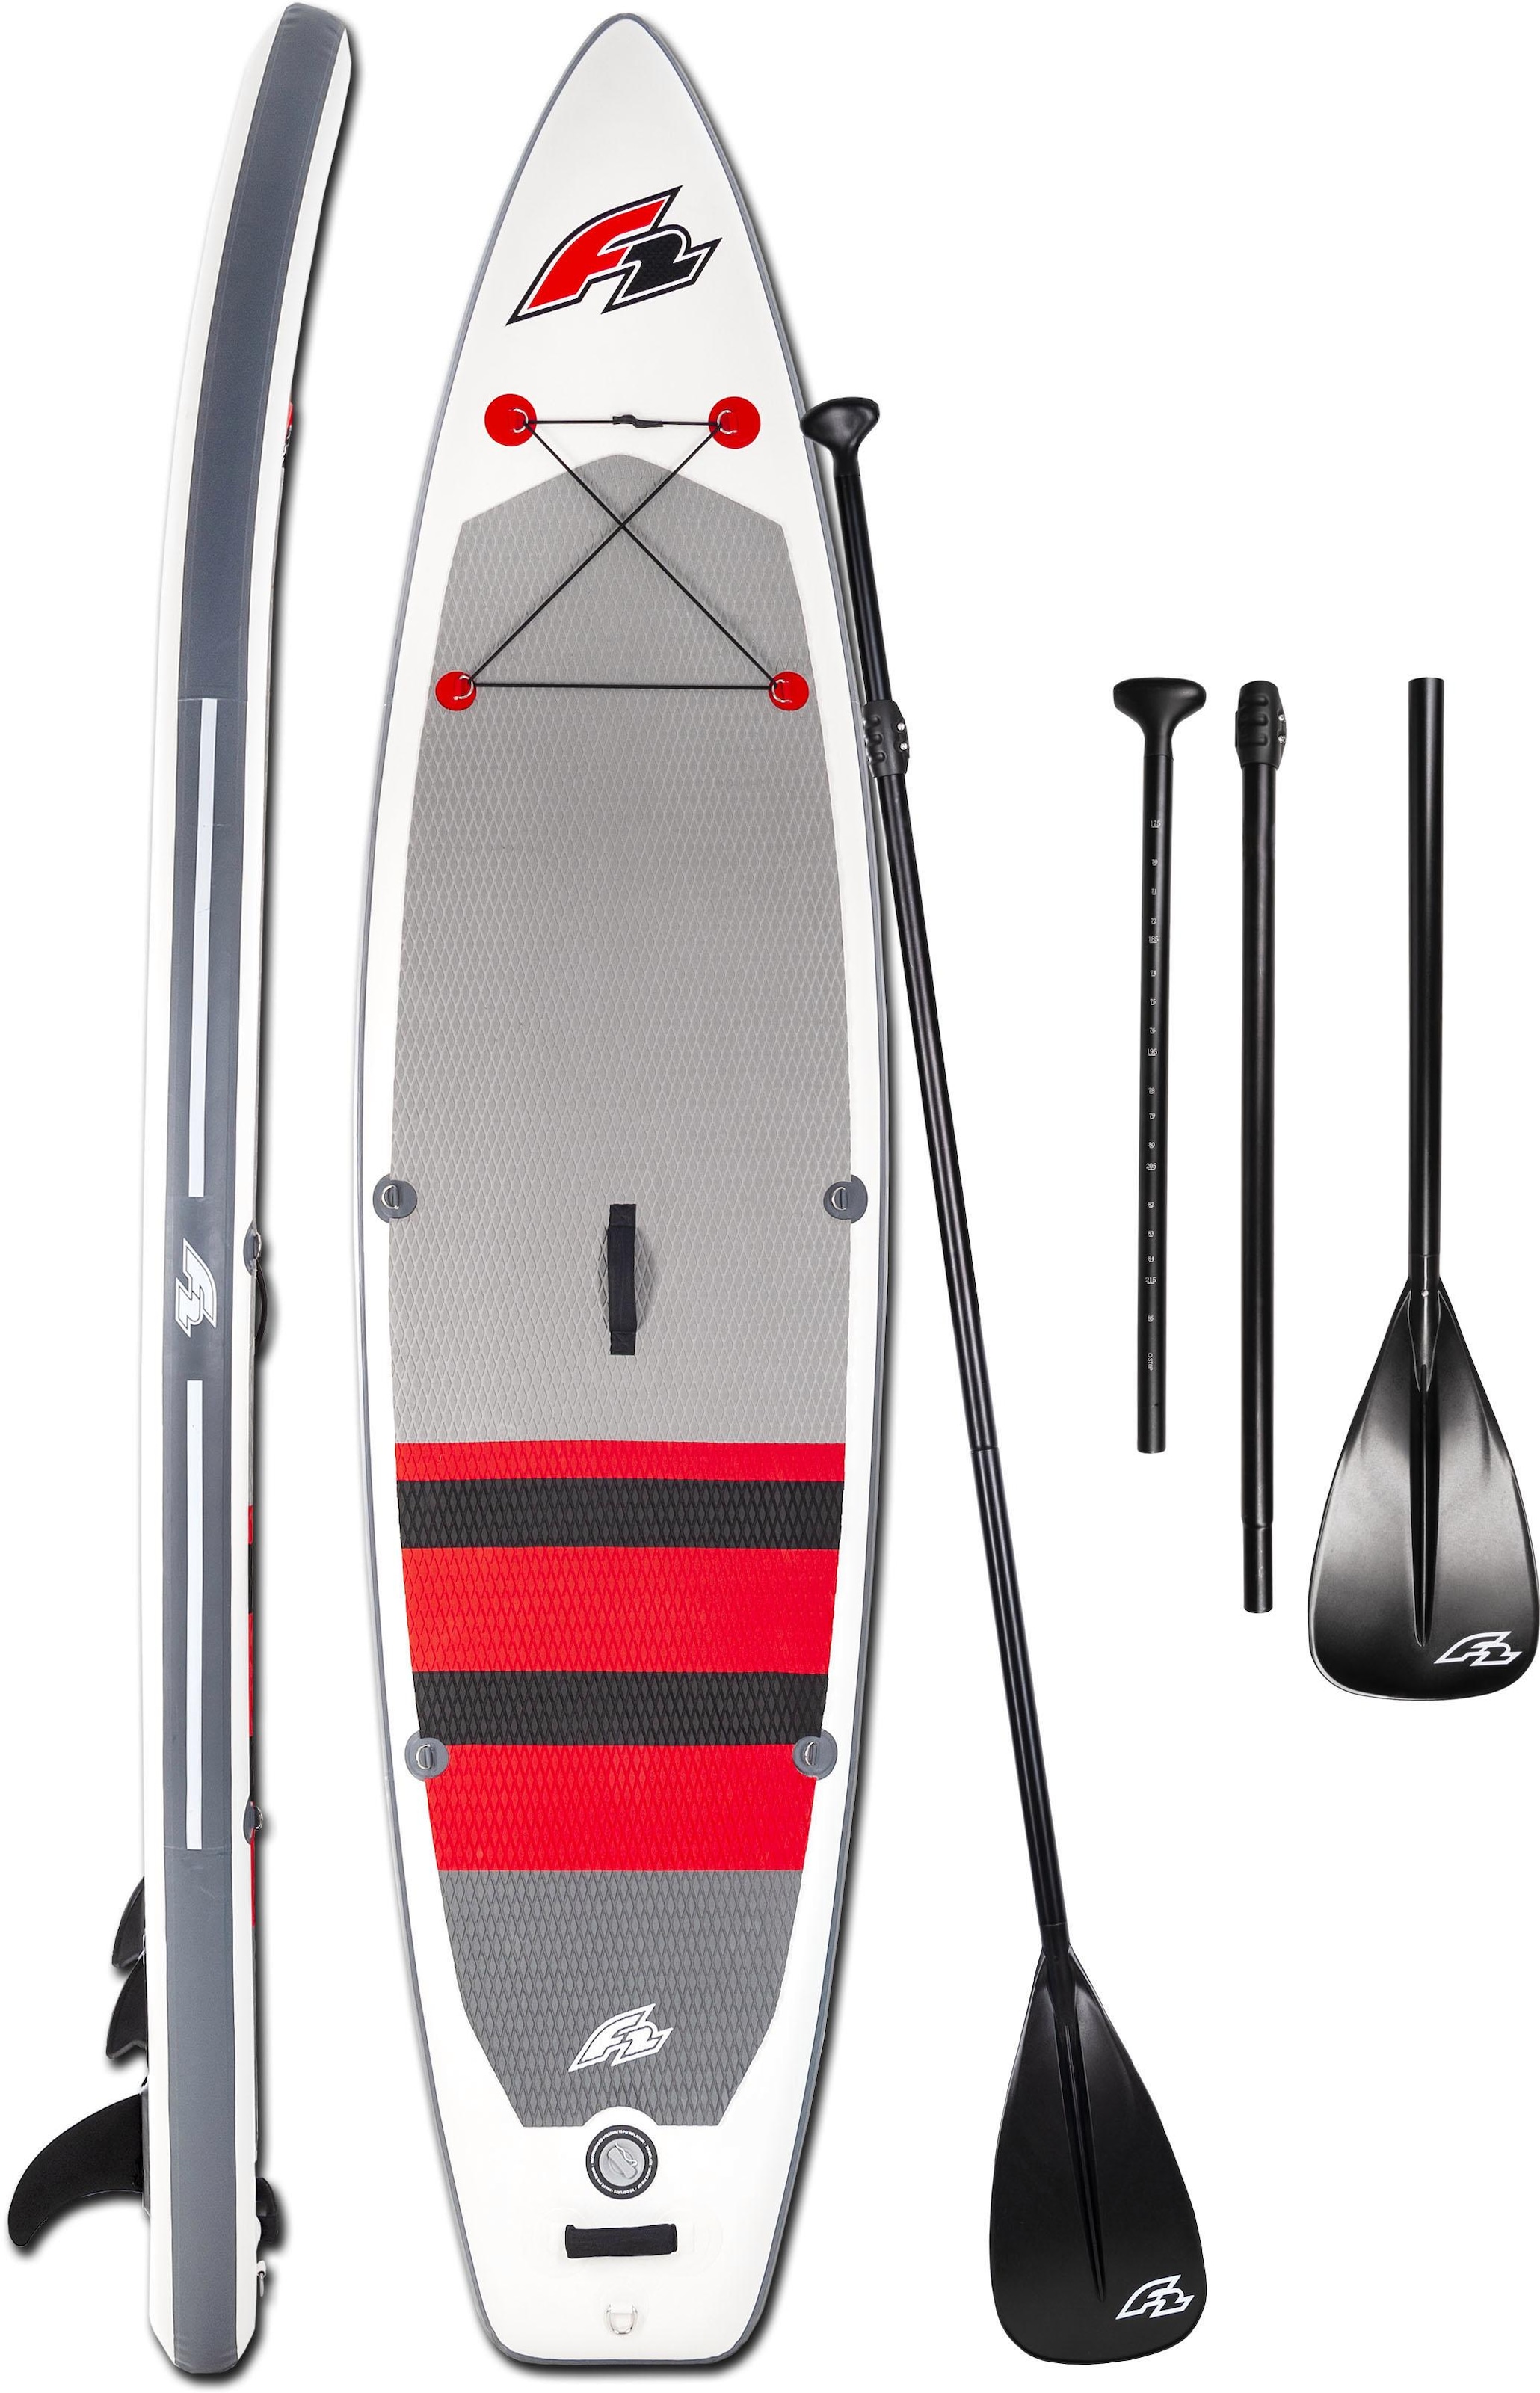 F2 Inflatable SUP-Board »Union (Set, 5 Paddling Stand | Sale Up 11,5«, tlg.), Im